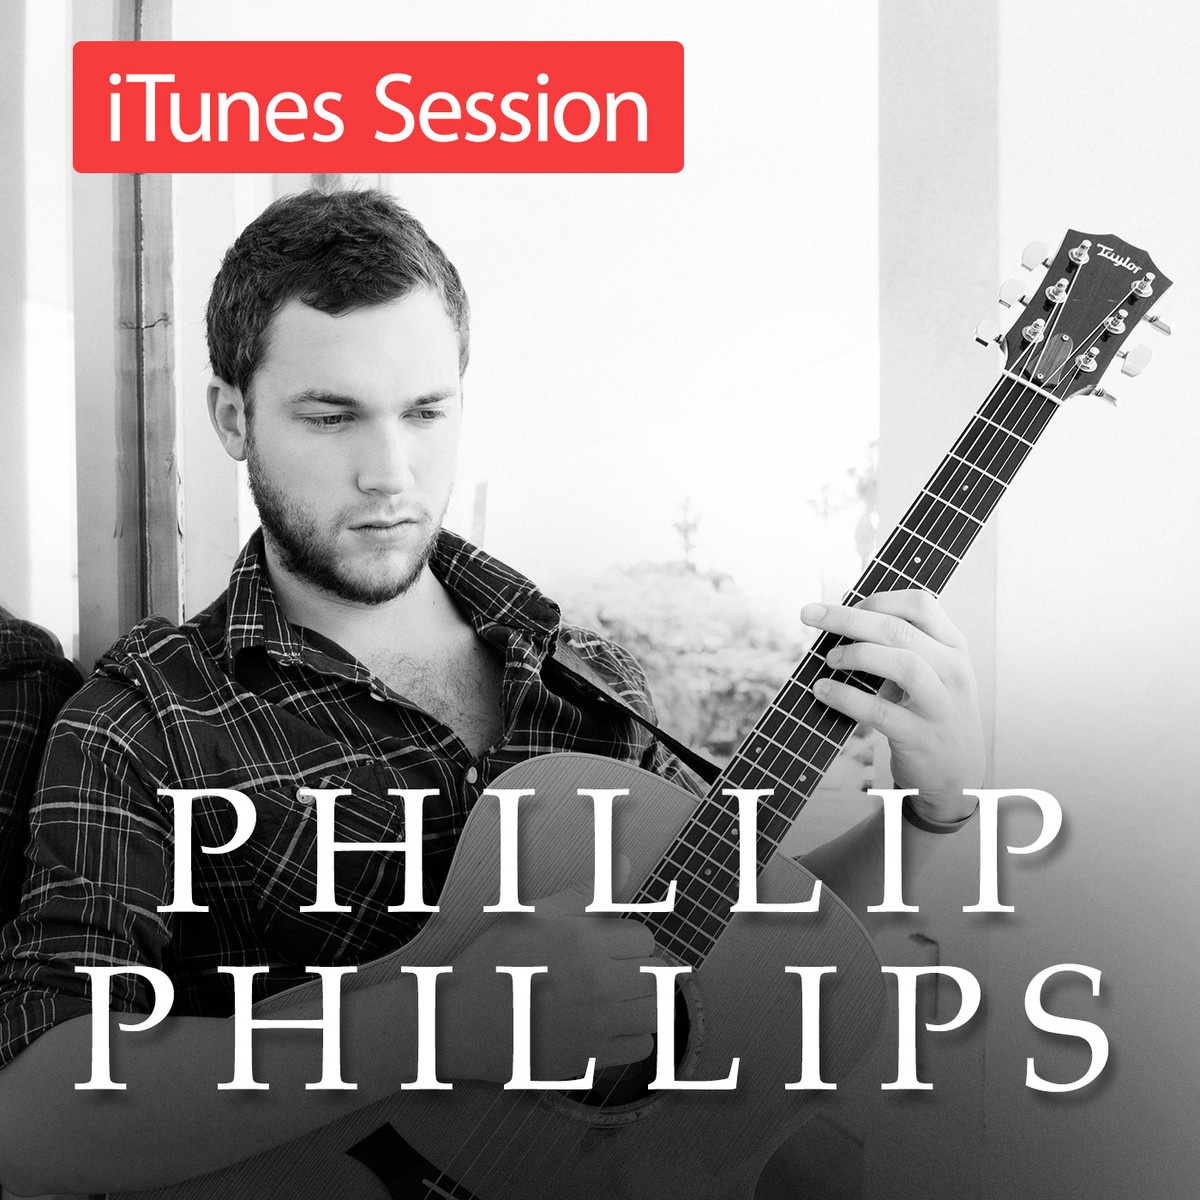 A Fool's Dance(iTunes Session)